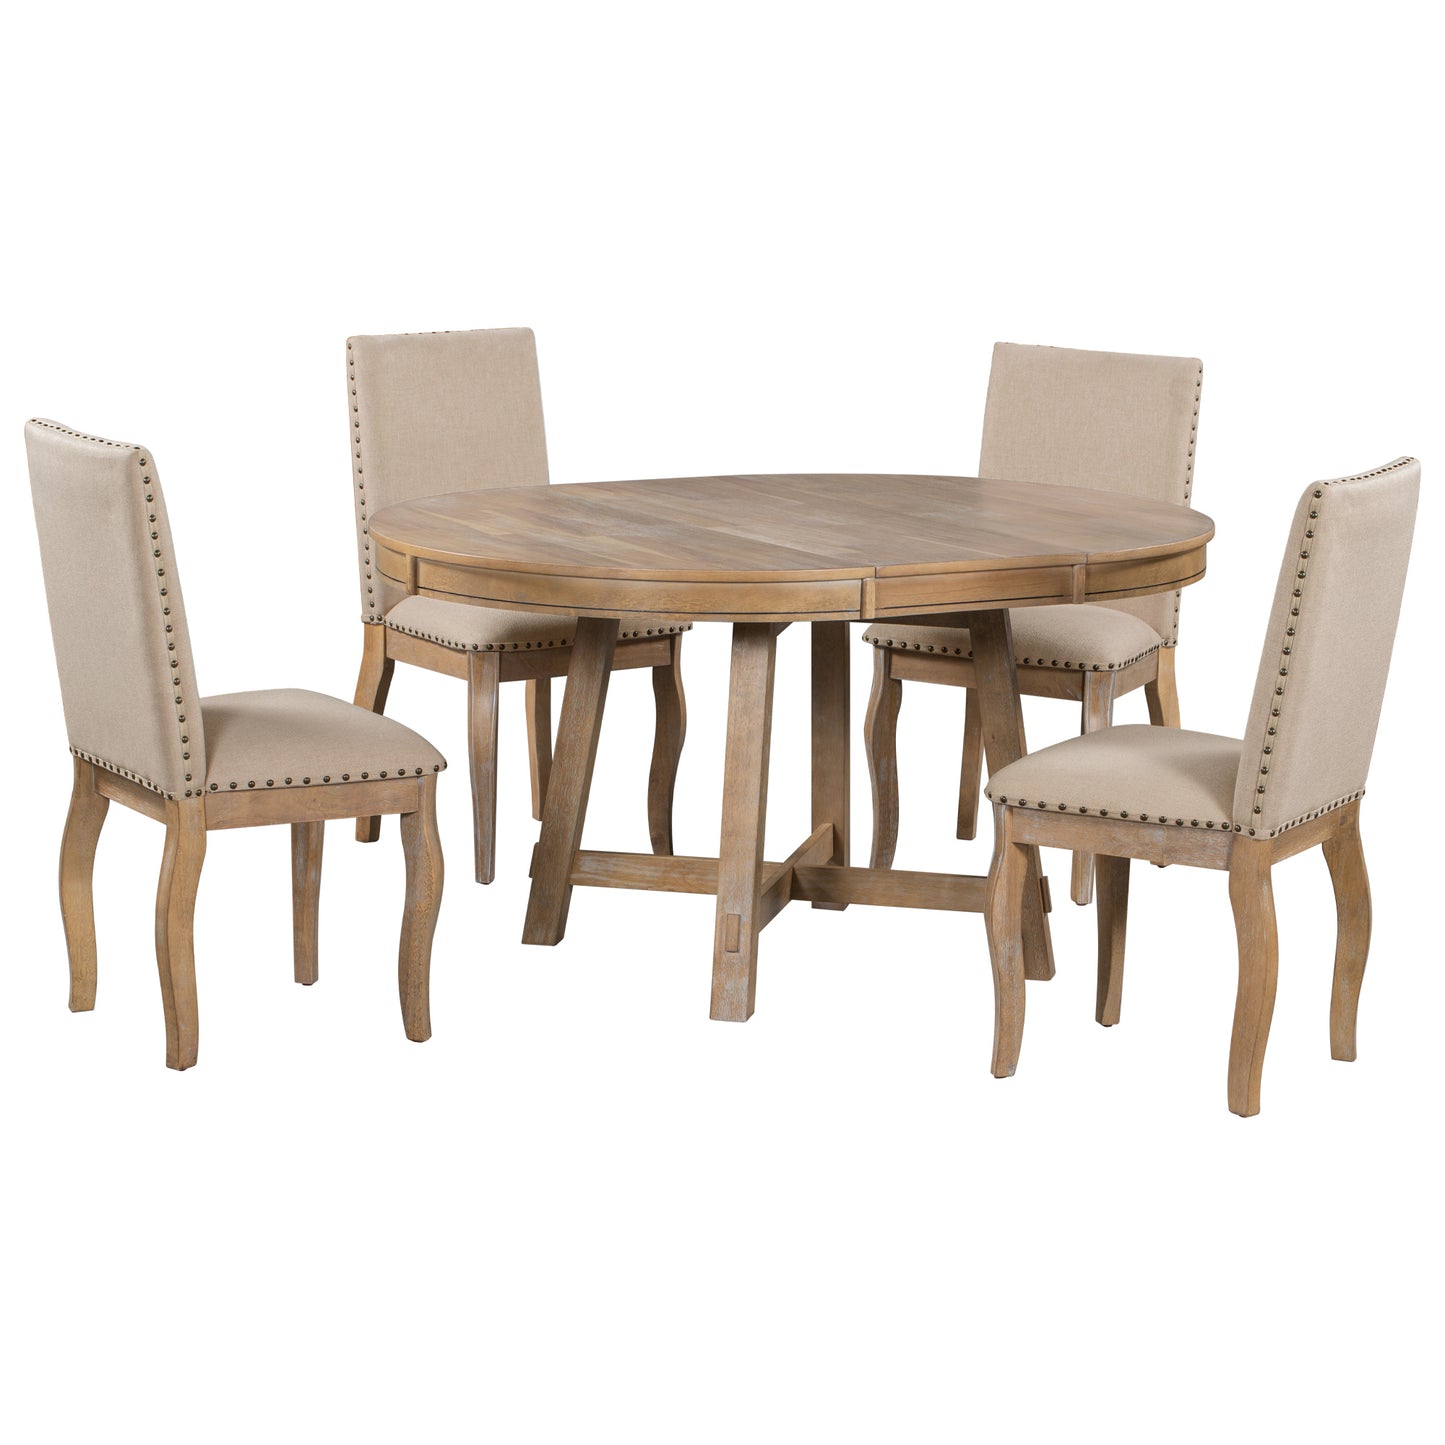 TREXM 5-Piece Farmhouse Dining Table Set Wood Round Extendable Dining Table and 4 Upholstered Dining Chairs (Natural Wood Wash)